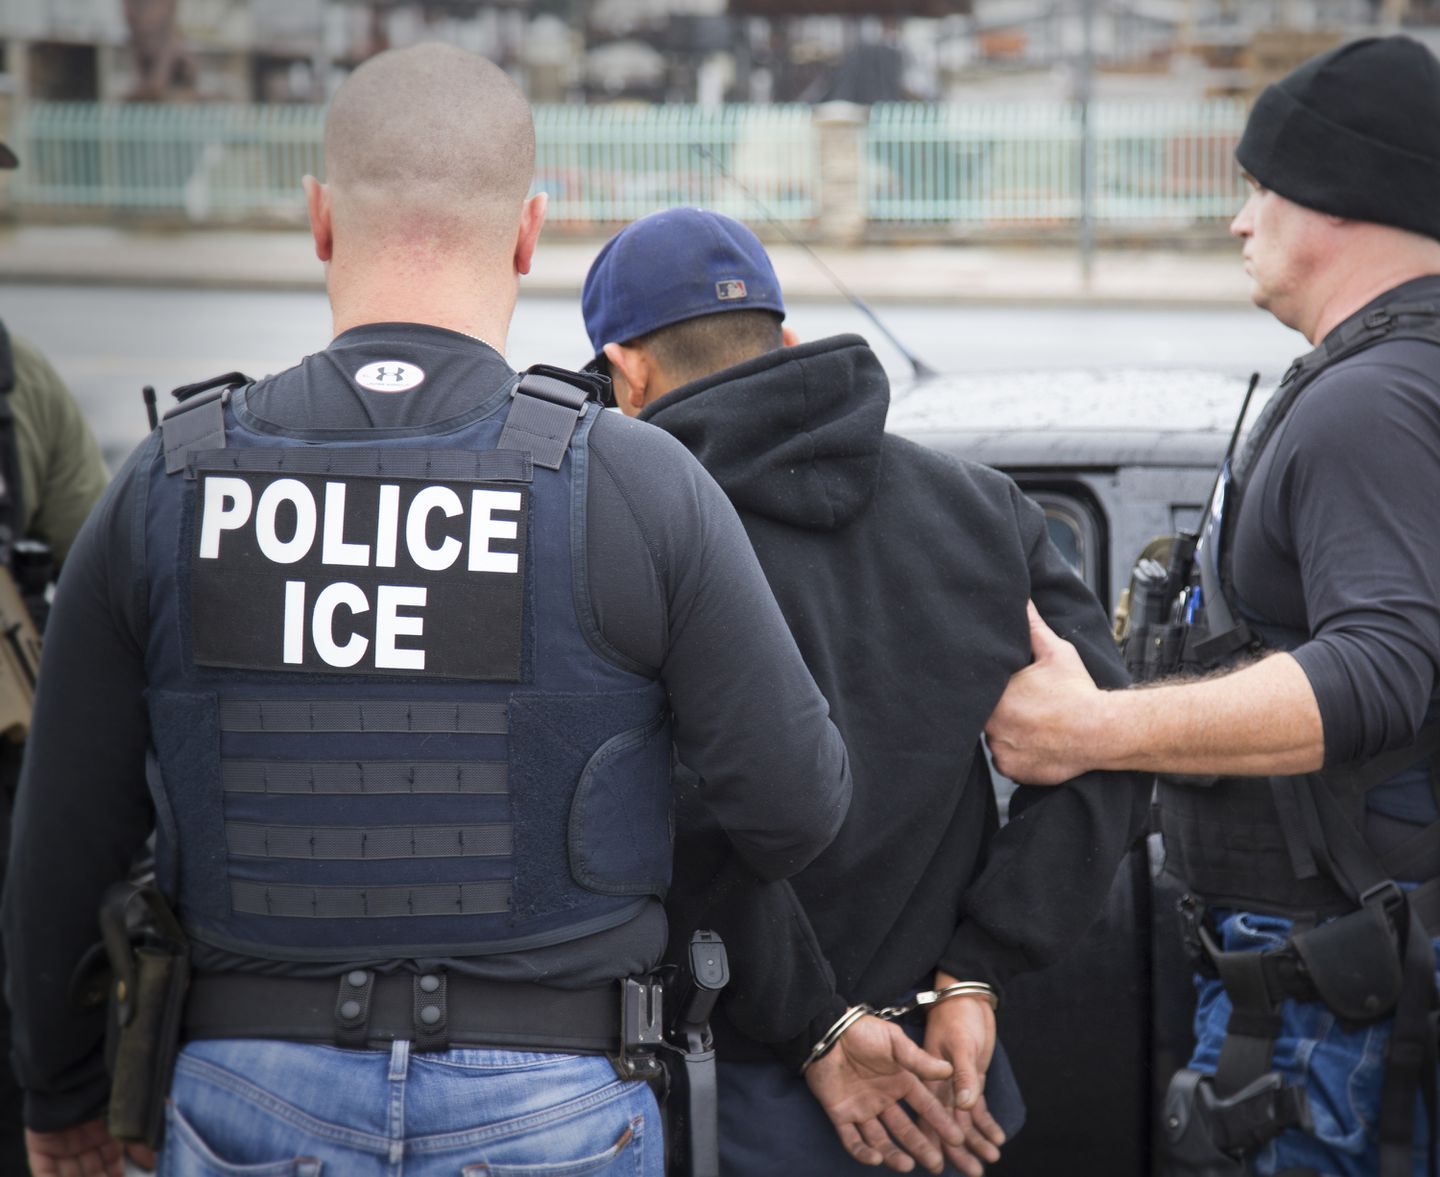 Controversial Halloween Costumes - ice immigration - Police Ice